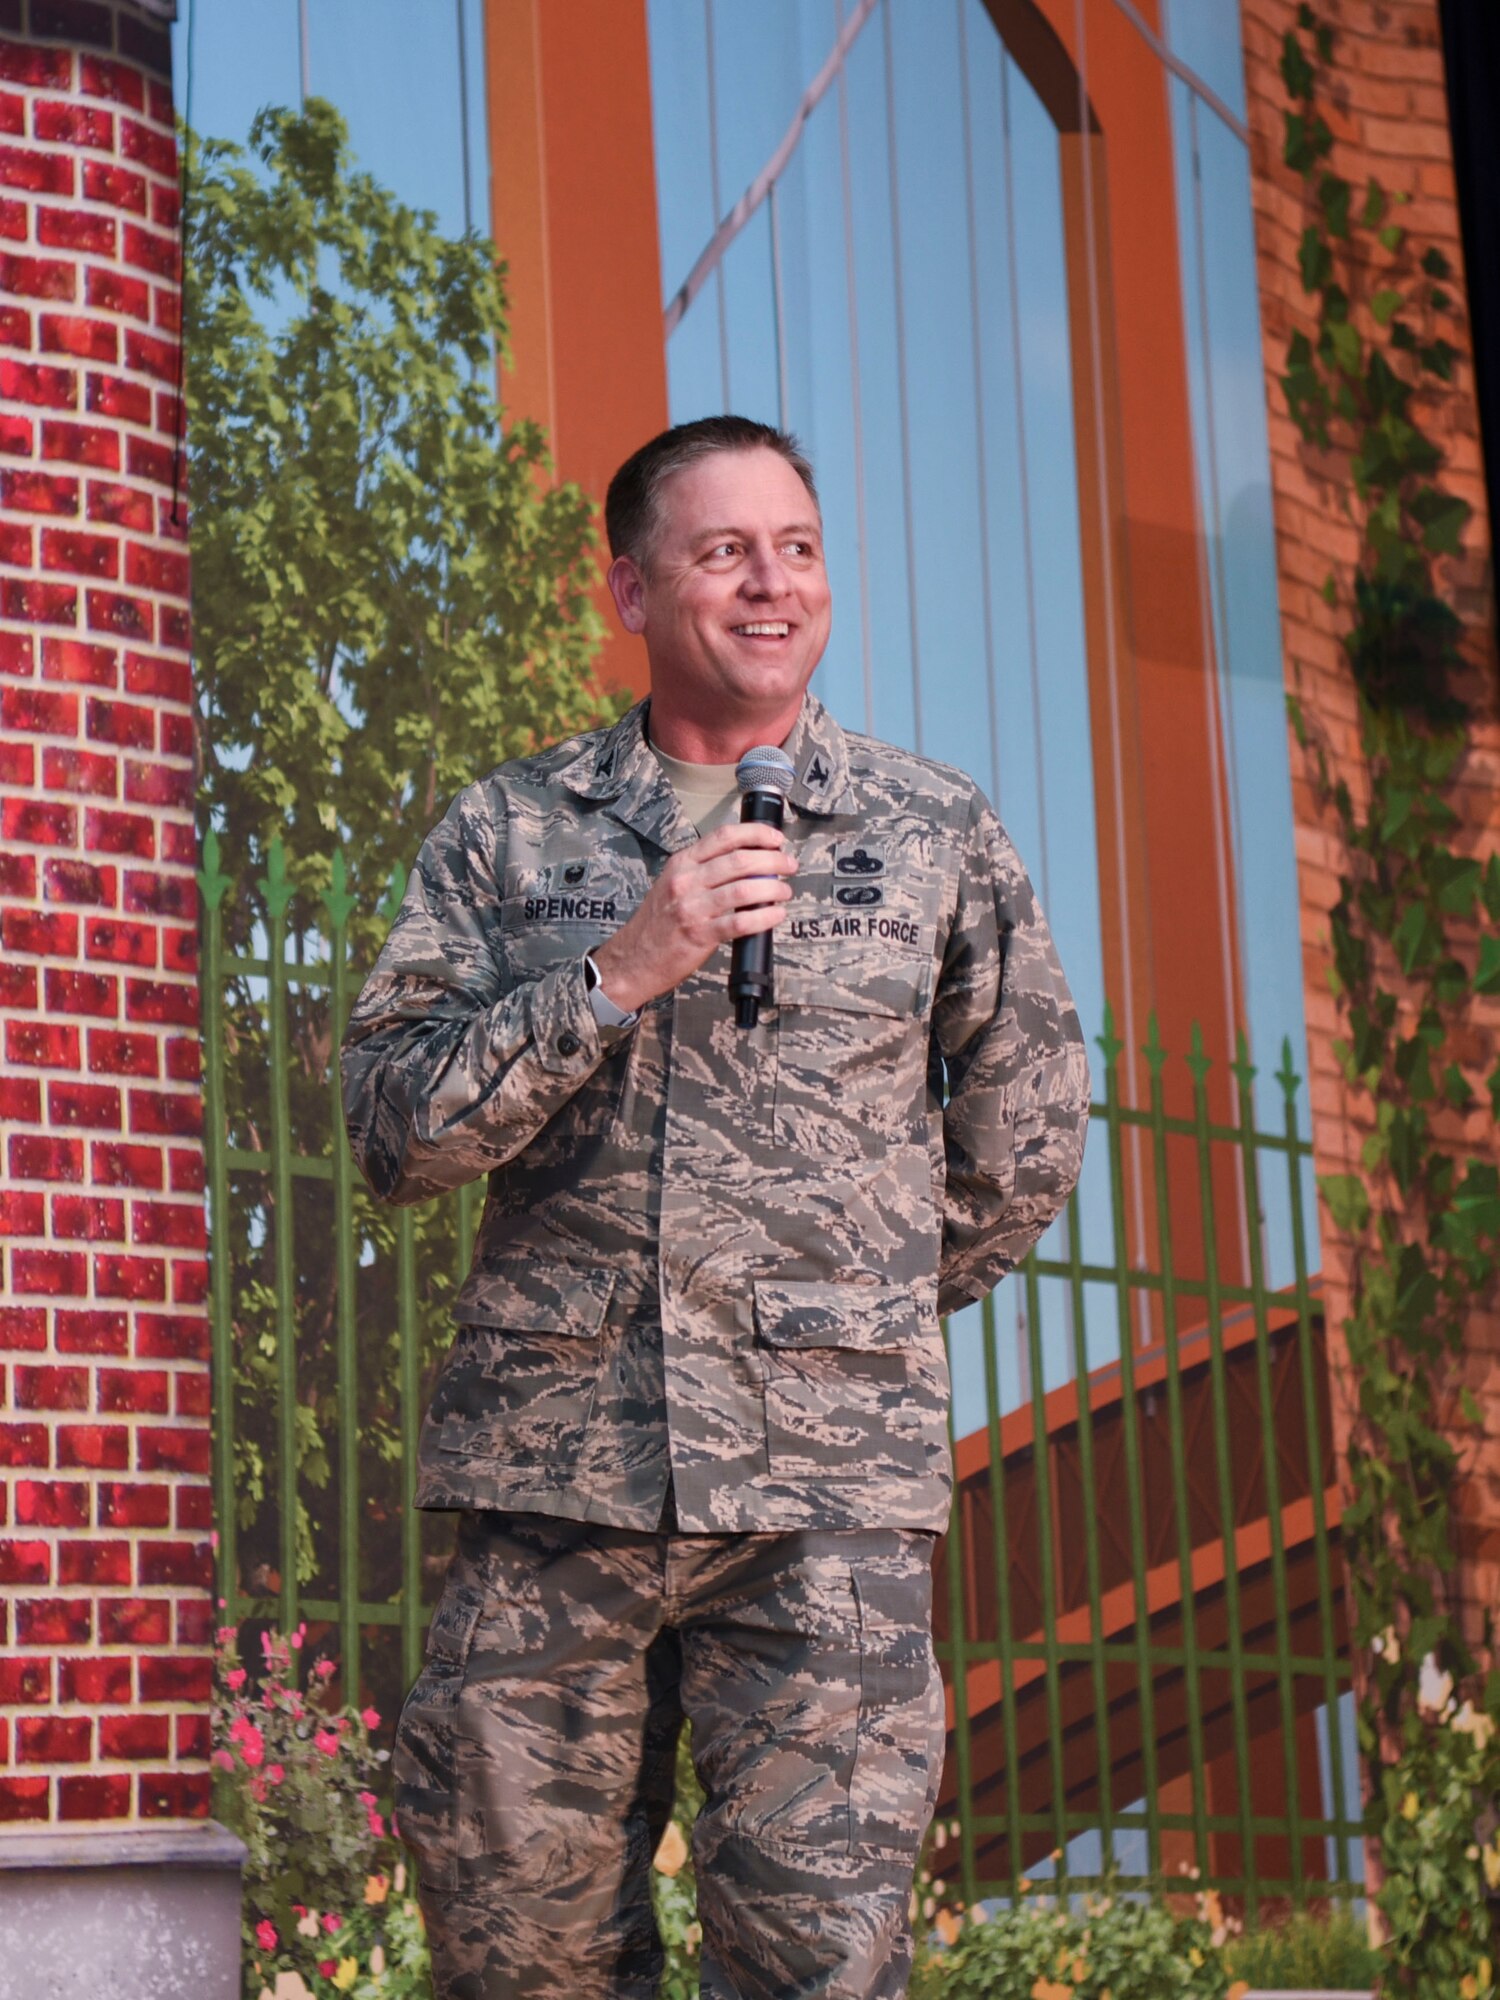 Colonel Benjamin Spencer, 319th Air Base Wing commander, interacts with the audience before a production of Sesame Street Live March 26, 2019, on Grand Forks Air Force Base, North Dakota. Spencer gave opening remarks before the performance began, and thanked the Sesame Street Live cast for coming to the base. (U.S. Air Force photo by Airman 1st Class Melody Wolff)